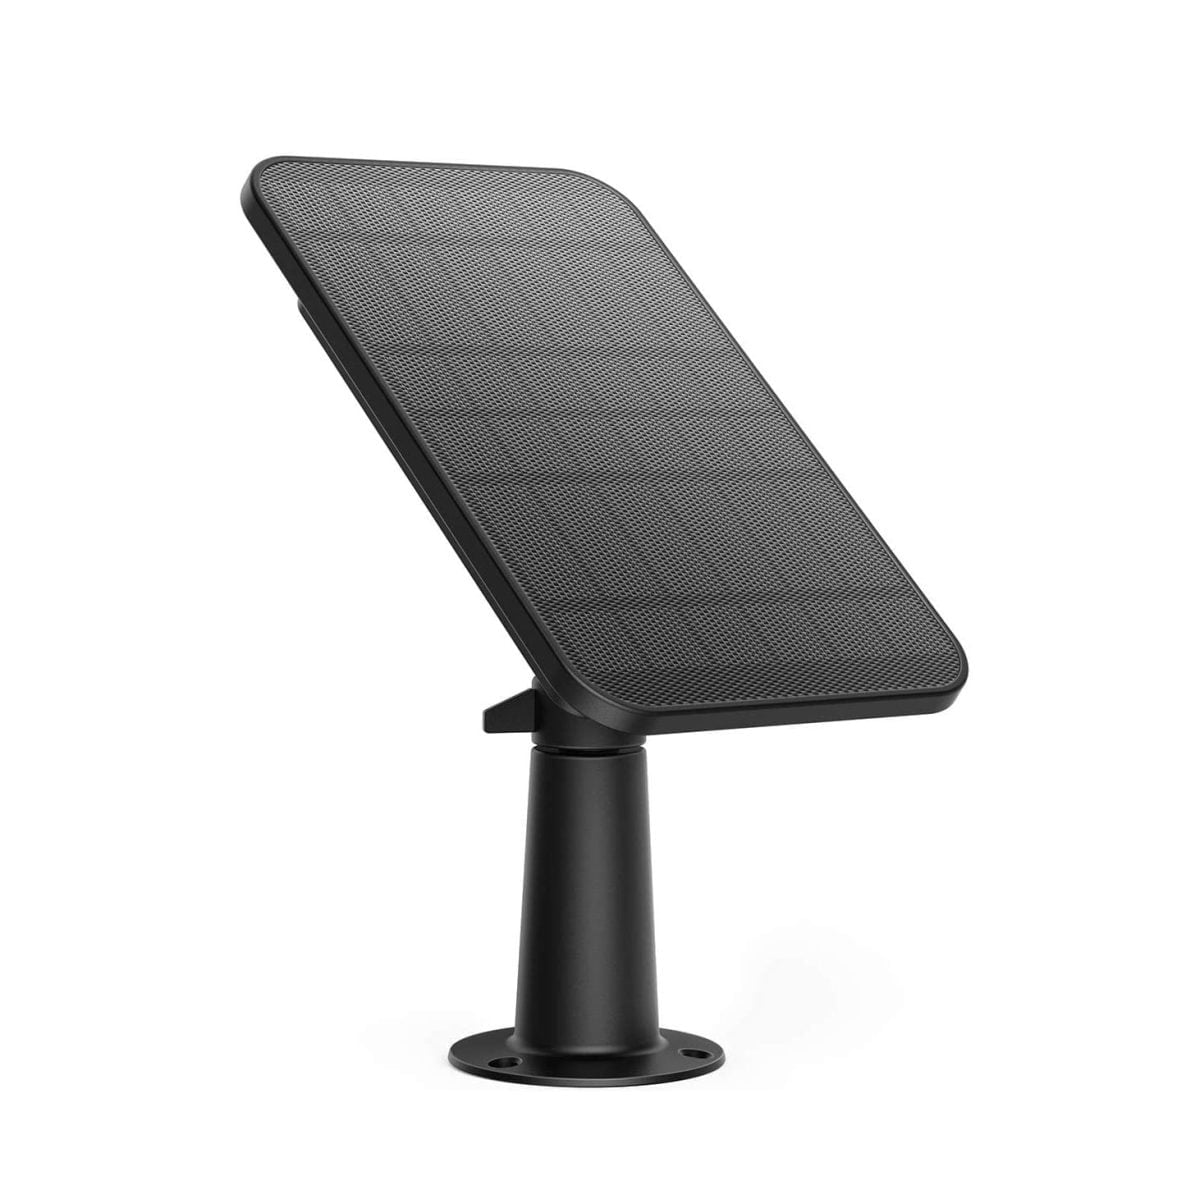 Anker &Lt;H1&Gt;Combo Offer Eufycam 2 Pro, Solar Panel, And Entry Sensor&Lt;/H1&Gt; &Lt;Div&Gt; &Lt;Div Class=&Quot;Meta-Subtitle&Quot;&Gt;This Combo Offer Comes With Eufycam 2 Pro 2K With The Base Station, Eufy Solar Panel, Eufy Motion Sensor, Eufy Entry Sensor Add-On&Lt;/Div&Gt; &Lt;Div&Gt; &Lt;Ul&Gt; &Lt;Li&Gt;&Lt;Strong&Gt;Eufycam 2 Pro 2K&Lt;/Strong&Gt;: Live-Stream And Record Footage In Crystal Clear 1080P Hd, So You See Exactly What Is Happening In And Around Your Home.&Lt;/Li&Gt; &Lt;Li&Gt;&Lt;Strong&Gt;Eufy Solar Pane : &Lt;/Strong&Gt;Provide Continuous Charging For Your Eufycam, Eufycam E, Eufycam 2, Eufycam 2 Pro, Eufycam 2C, Or Eufycam 2C Pro.&Lt;/Li&Gt; &Lt;Li&Gt;&Lt;Strong&Gt;Eufy Entry Sensor Add-On : &Lt;/Strong&Gt;2 Years Battery Life One Battery Provides 800 Days Of Monitoring.&Lt;/Li&Gt; &Lt;/Ul&Gt; &Lt;/Div&Gt; &Lt;/Div&Gt; &Lt;H5&Gt;Warranty: Anker Product Warranty&Lt;/H5&Gt; &Lt;Pre&Gt;&Lt;Strong&Gt;We Provide Wholesale And Retail Shipping To Saudi Arabia, Oman, Qatar, Bahrain And Kuwait.&Lt;/Strong&Gt;&Lt;/Pre&Gt; Eufy Combo Offer Eufycam 2 Pro, Solar Panel, And Entry Sensor